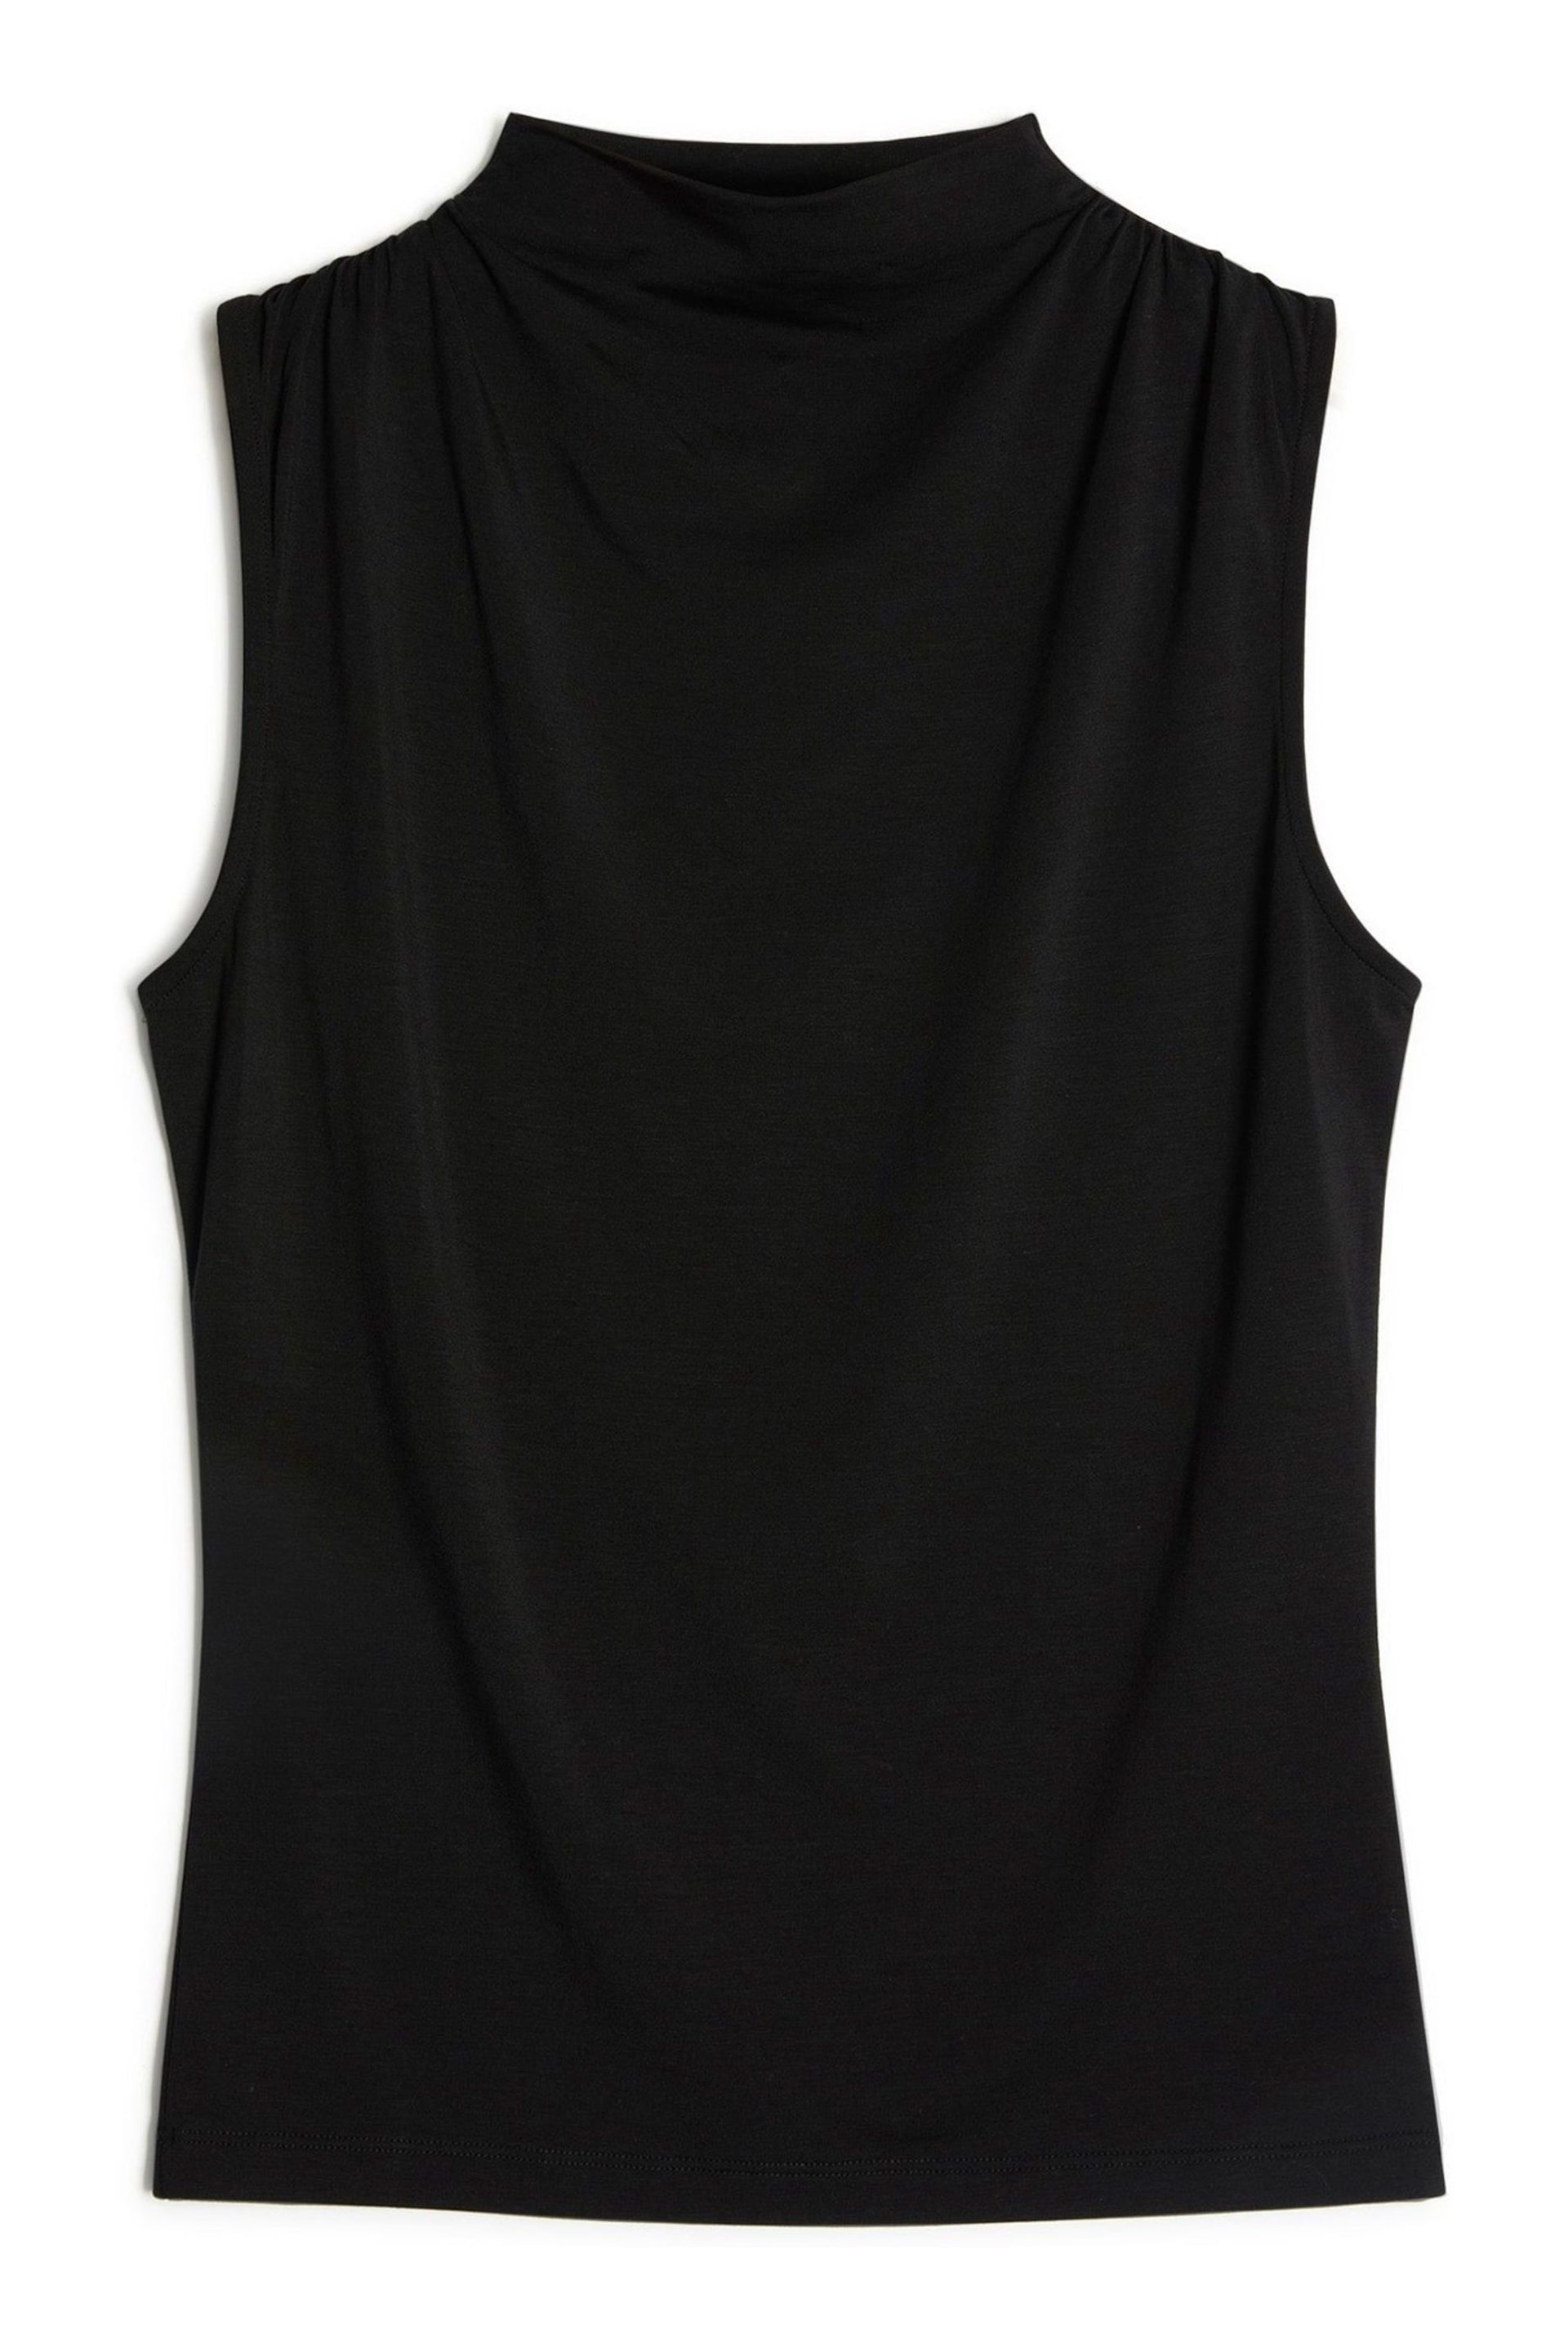 Albaray Sleeveless Ruched Turtle Neck Black Top - Image 4 of 4